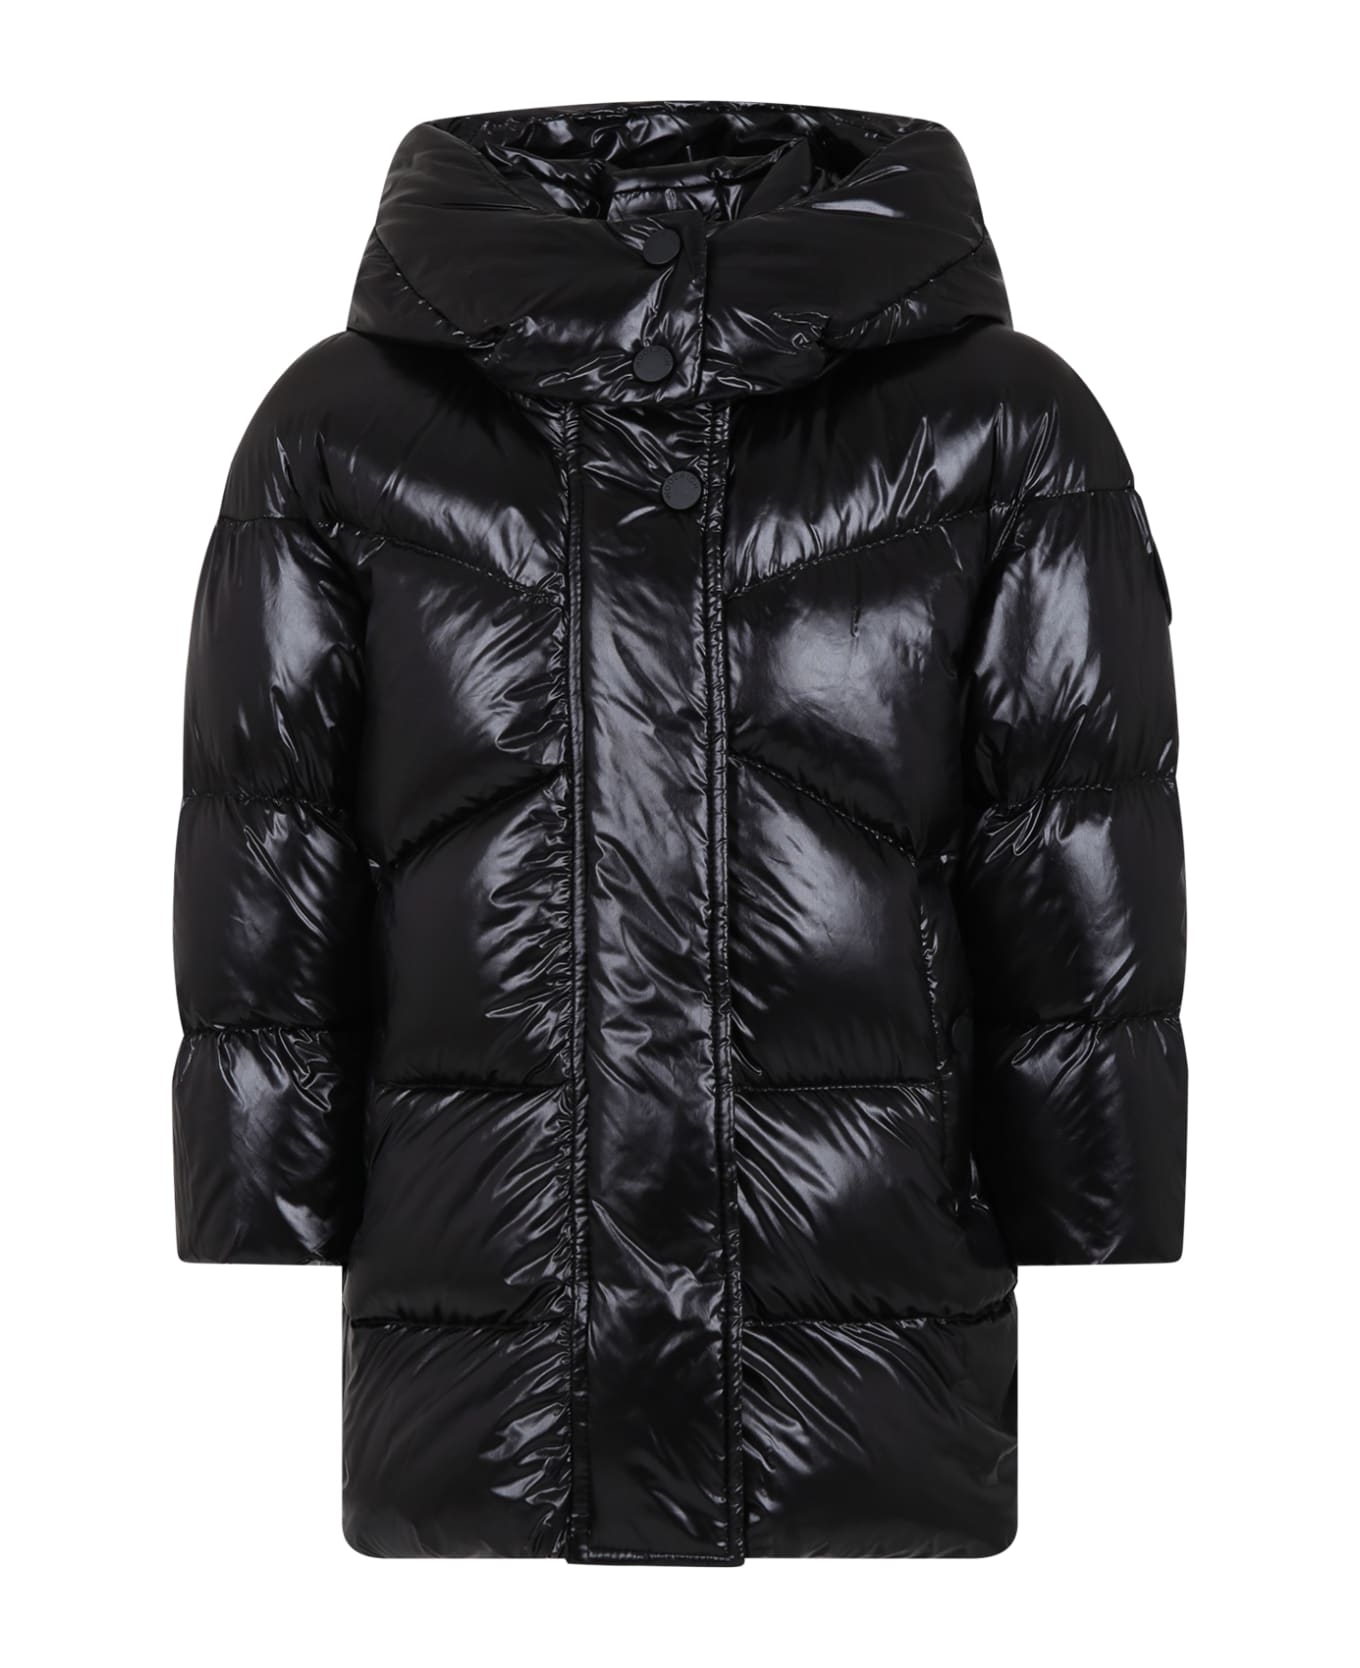 Woolrich Black Aliquippa Jacket For Kids With Logo - Black